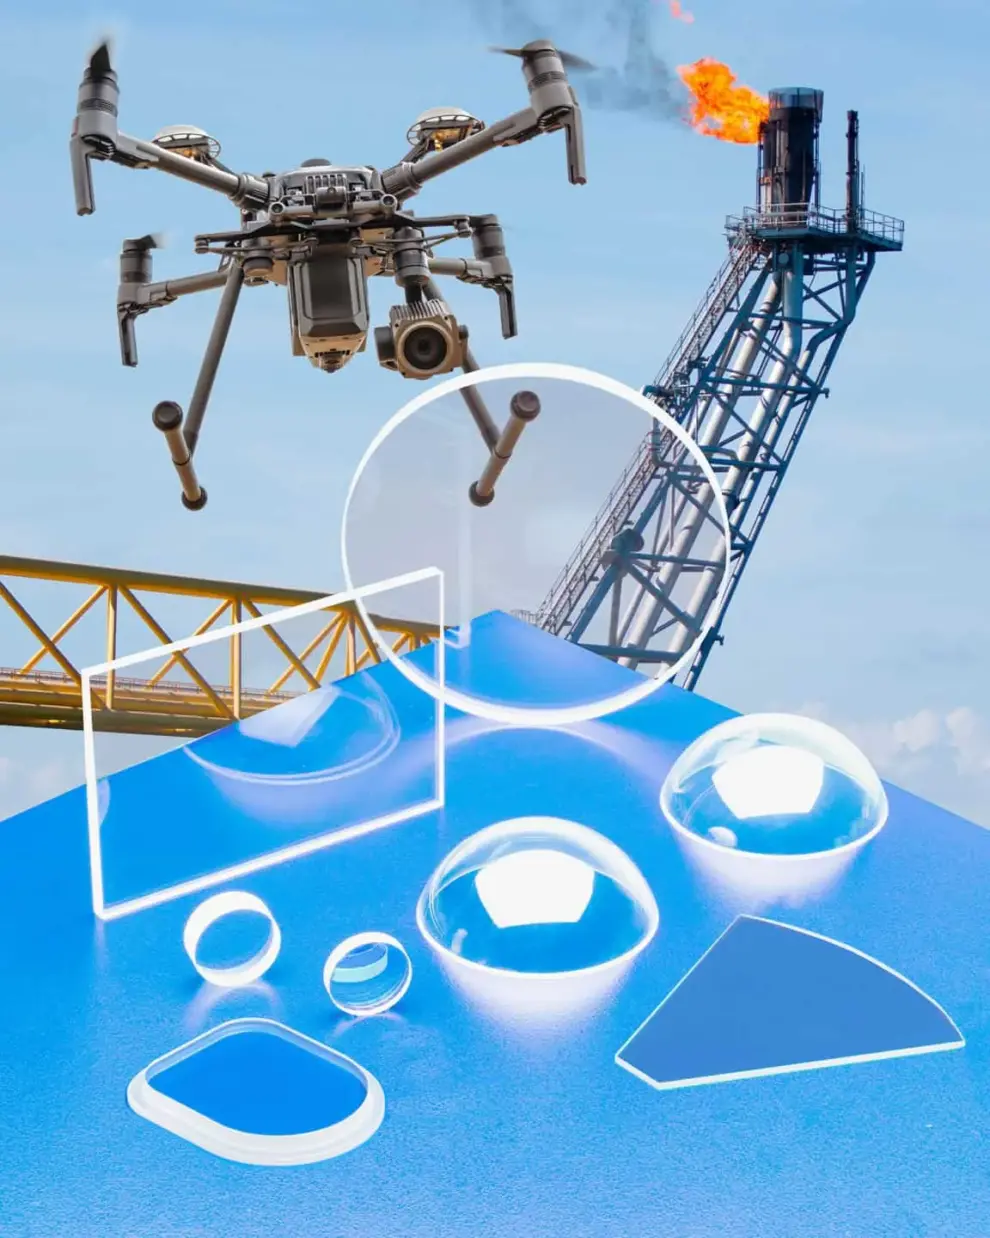 SAPPHIRE LENSES, WINDOWS & DOMES  PROTECT DRONE OPTICS IN HARSH ENVIRONMENTS